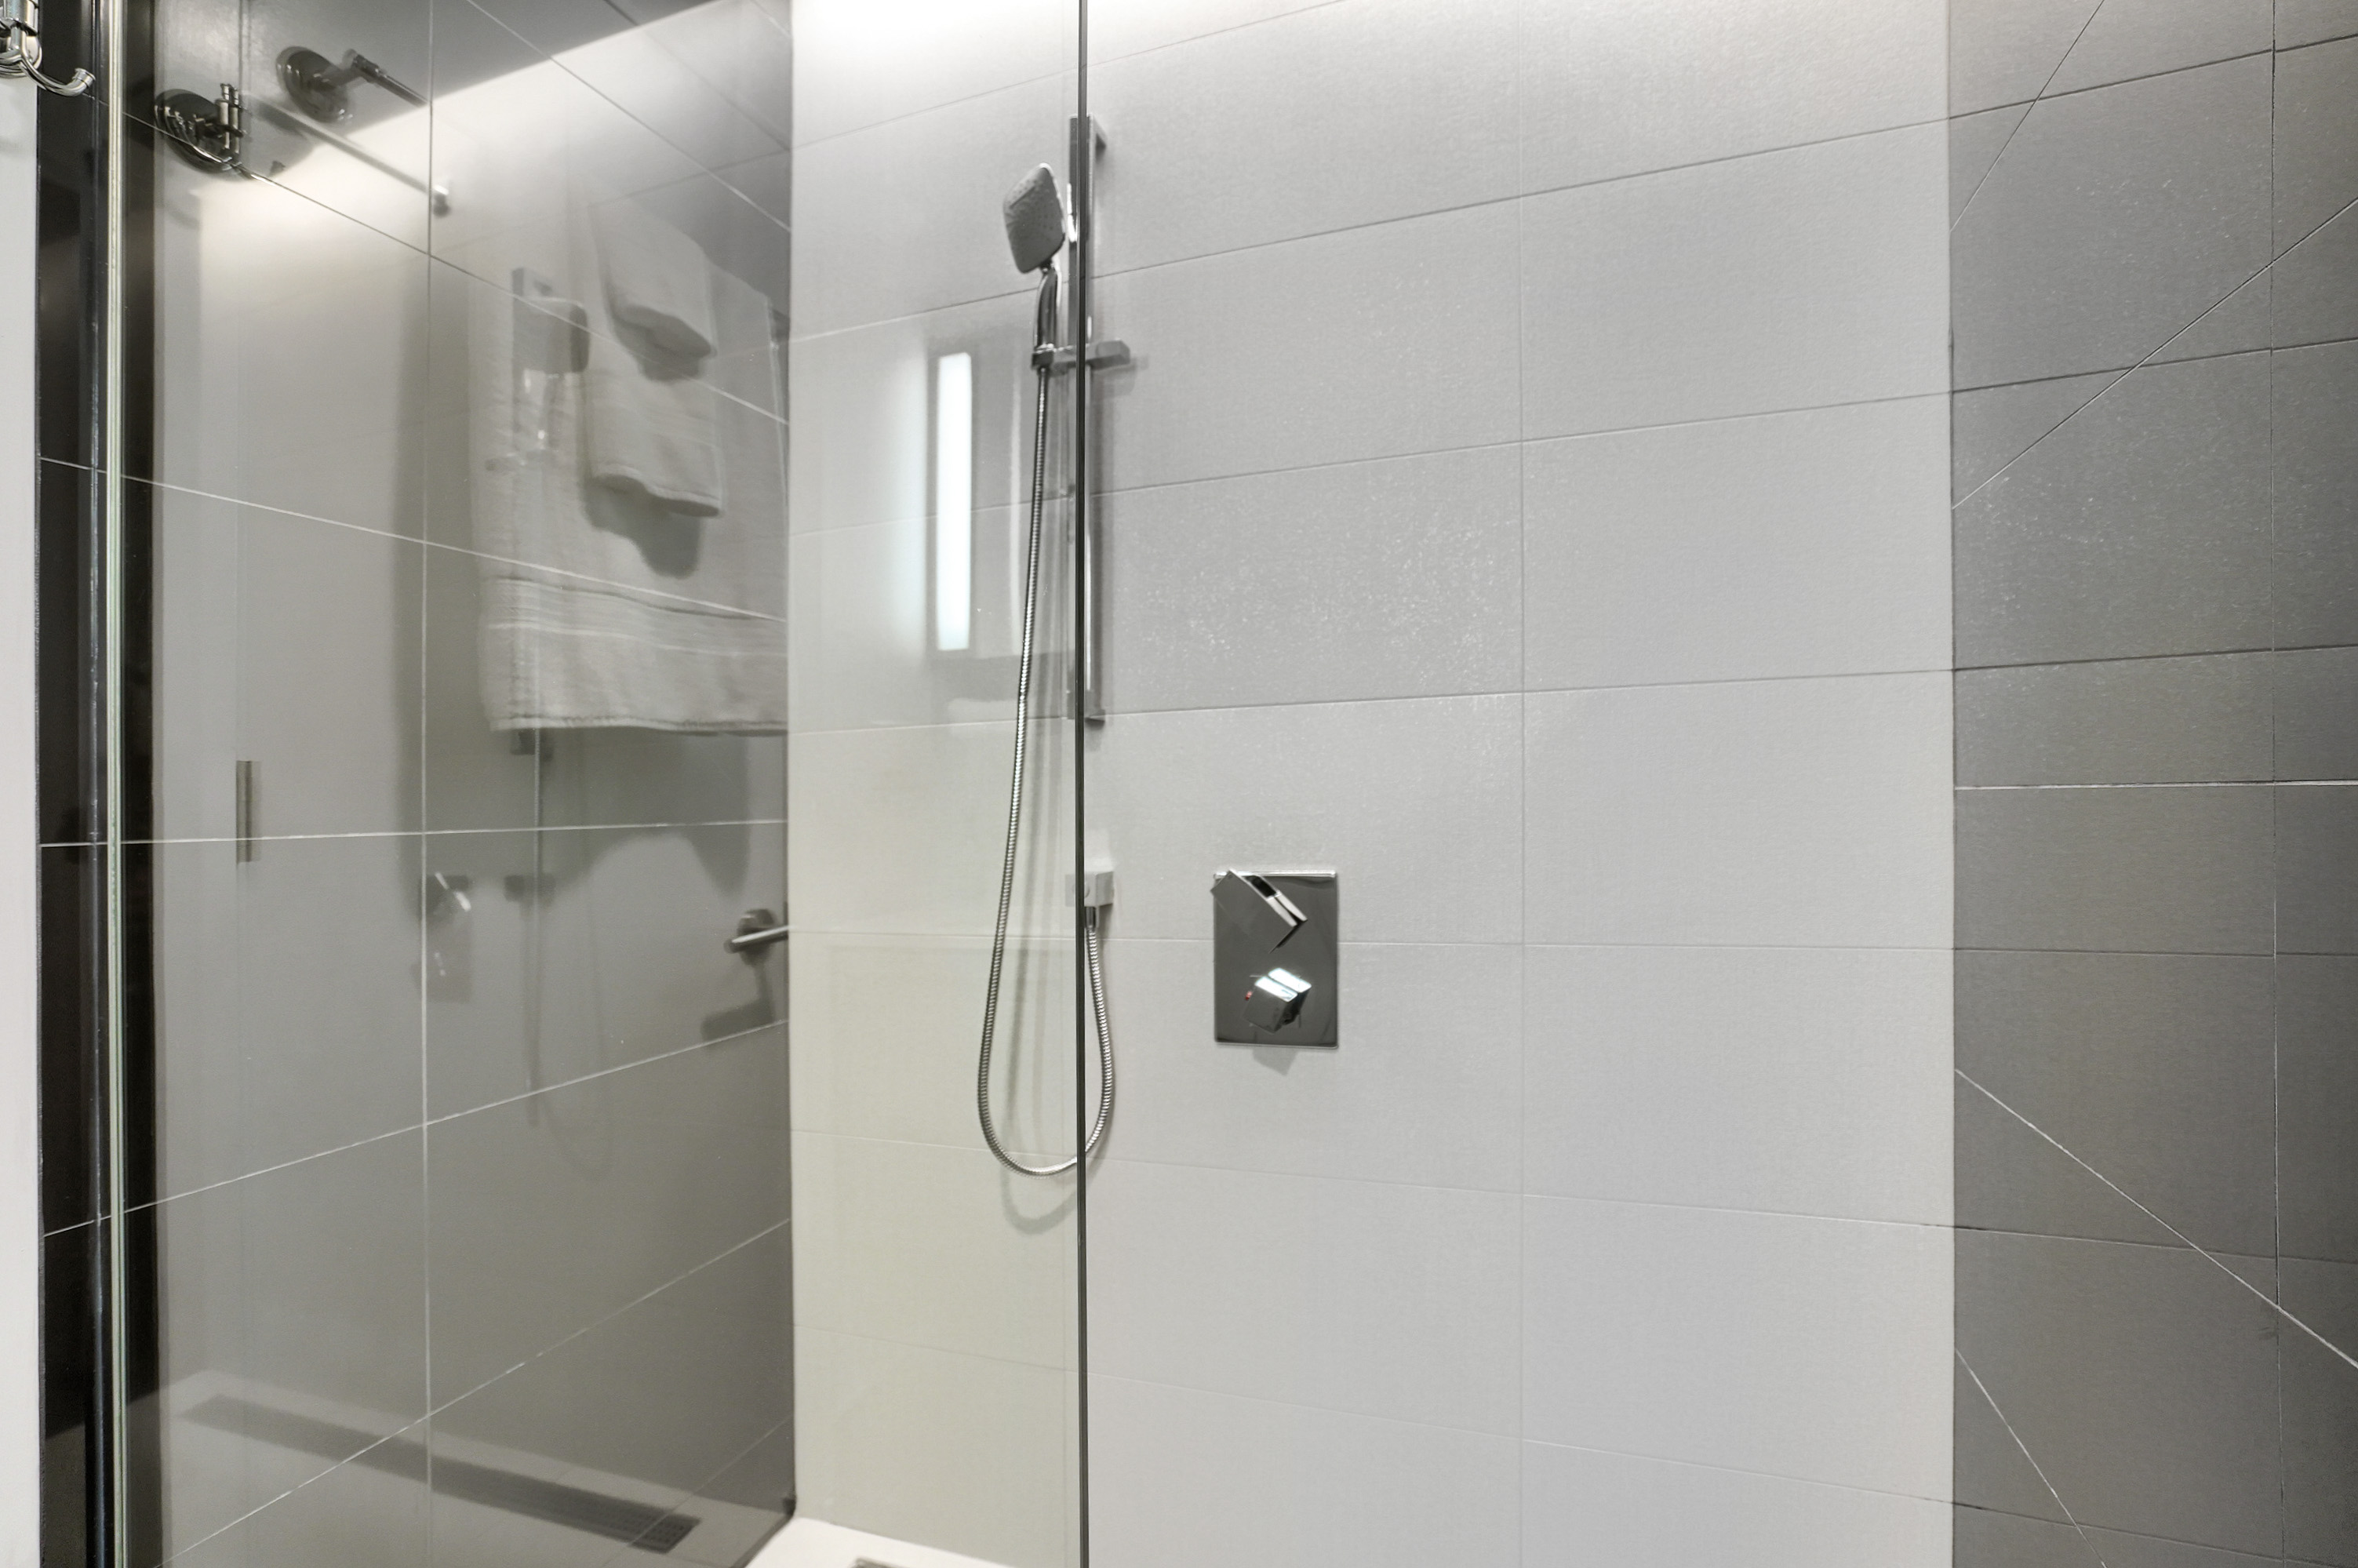 Close-up of the floor-to-ceiling glass shower with adjustable stainless shower head in the master bath of this furnished executive housing apartment in montreal. Stainless accents, white and gray sleek tile.